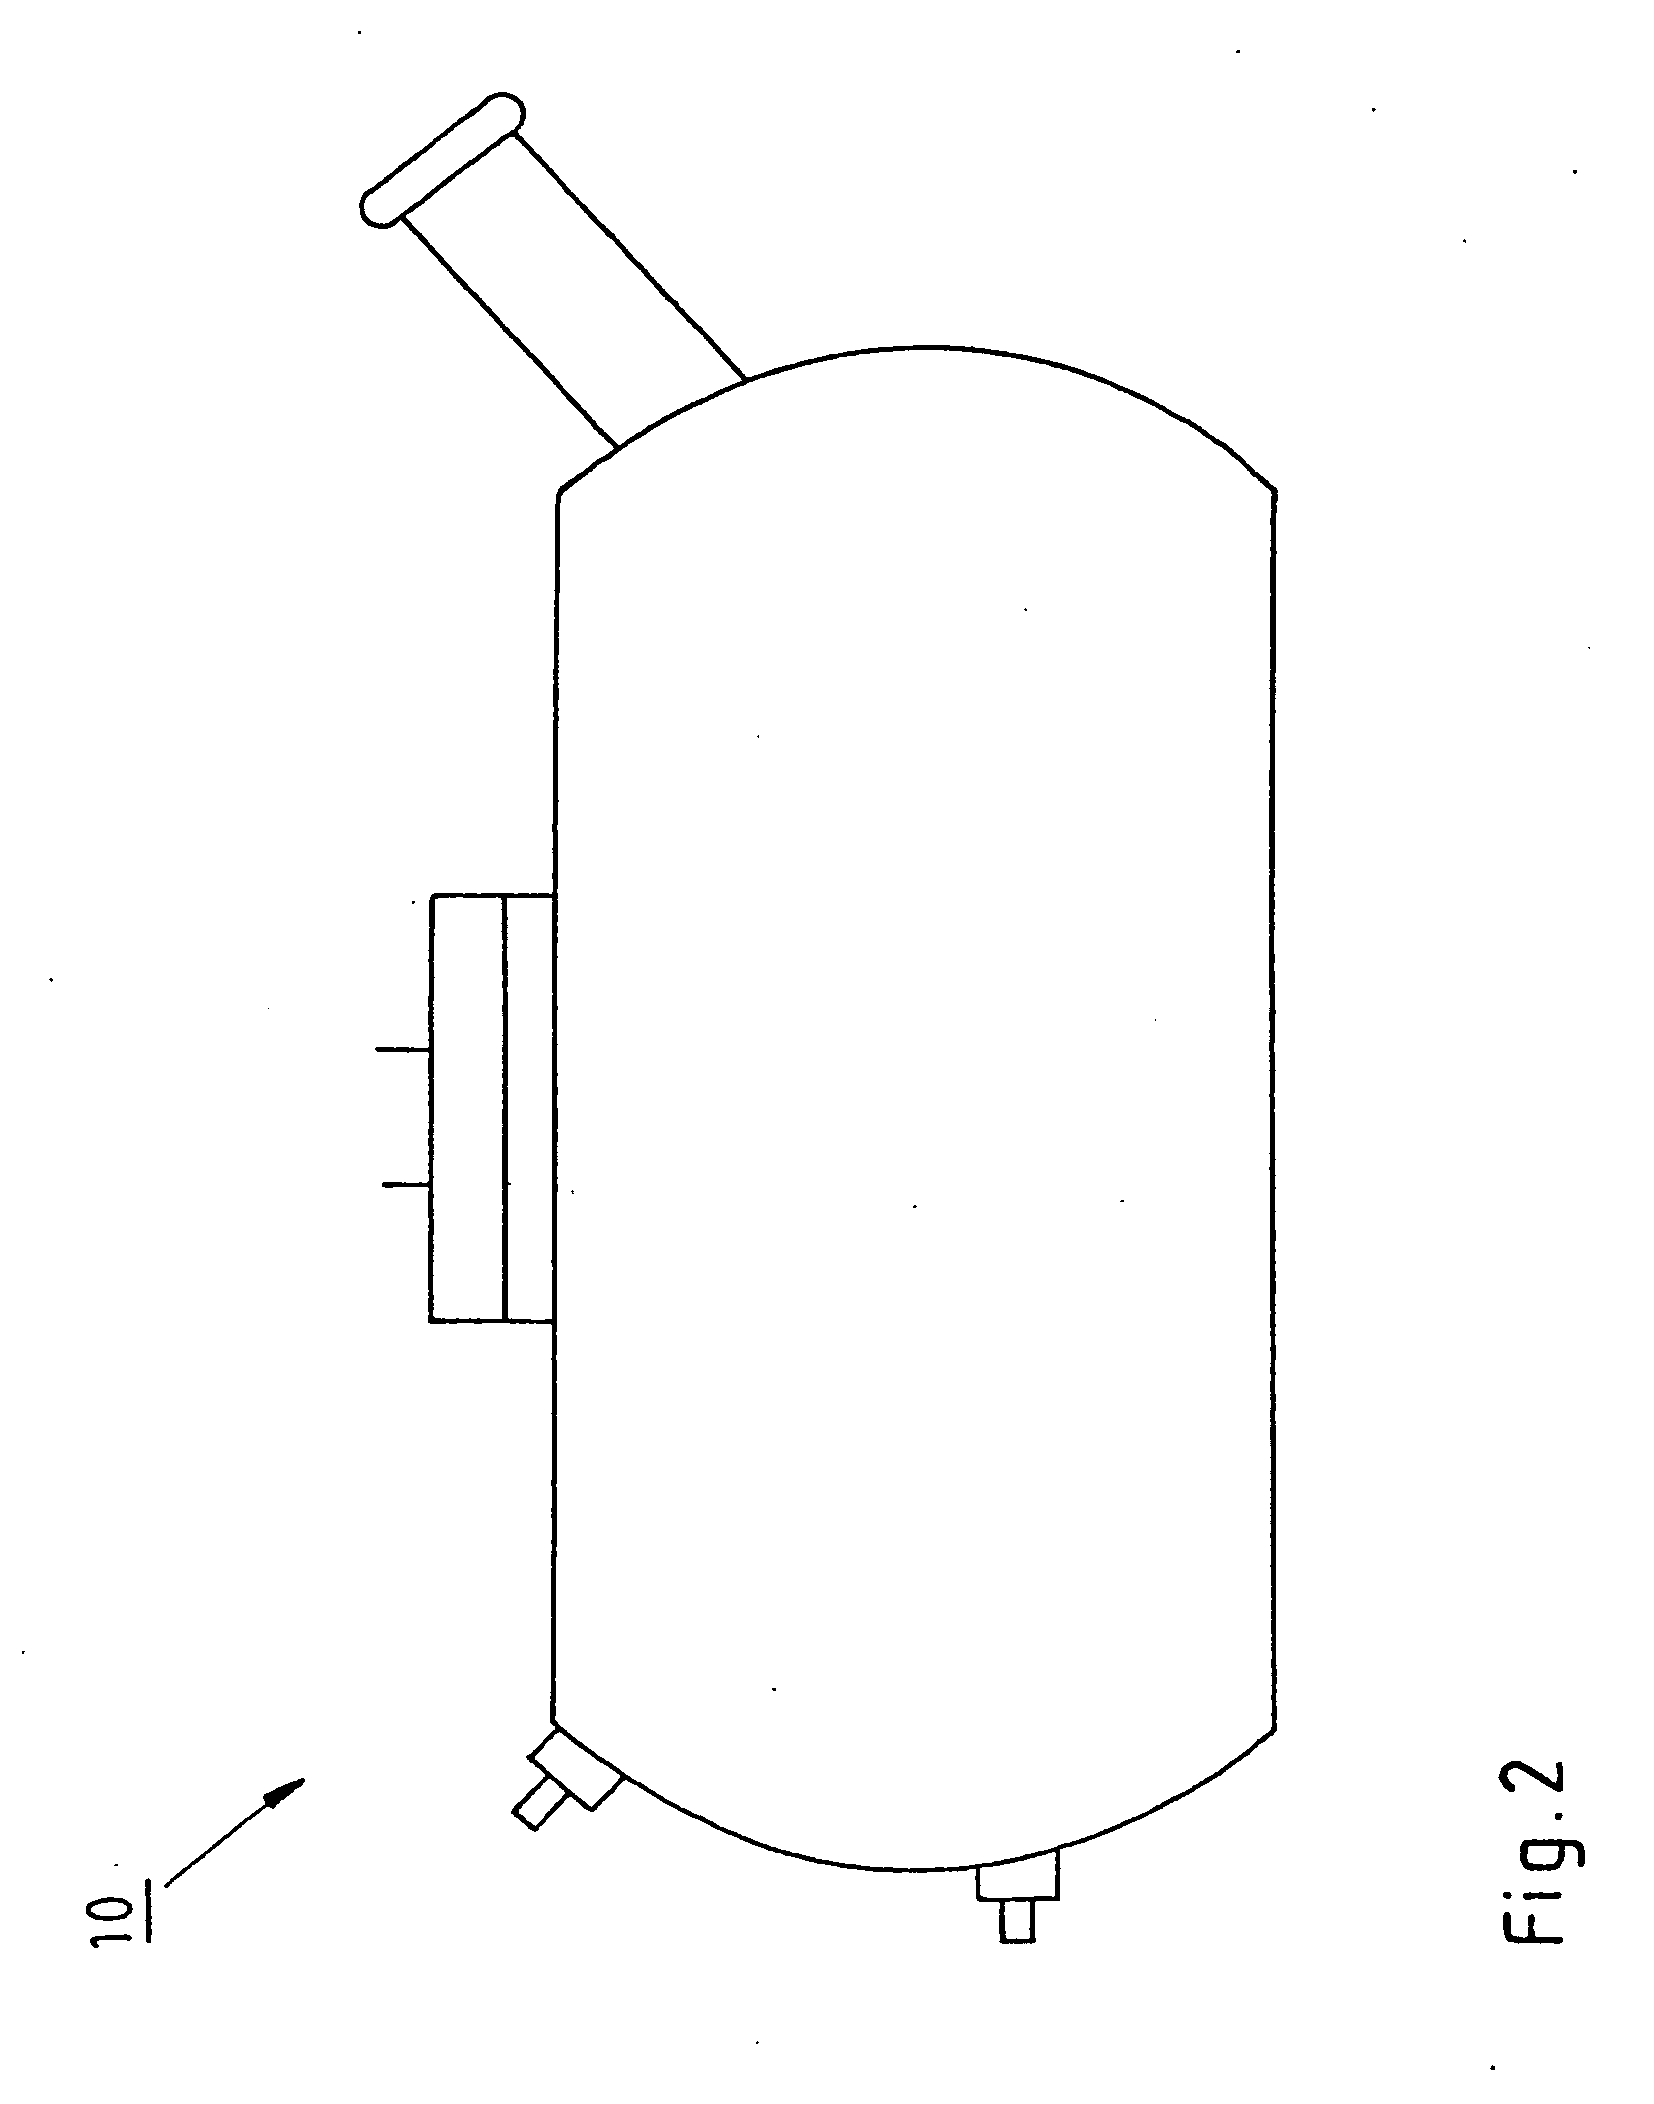 Method and device for providing at least one fuel, in particular, for motor vehicle engines